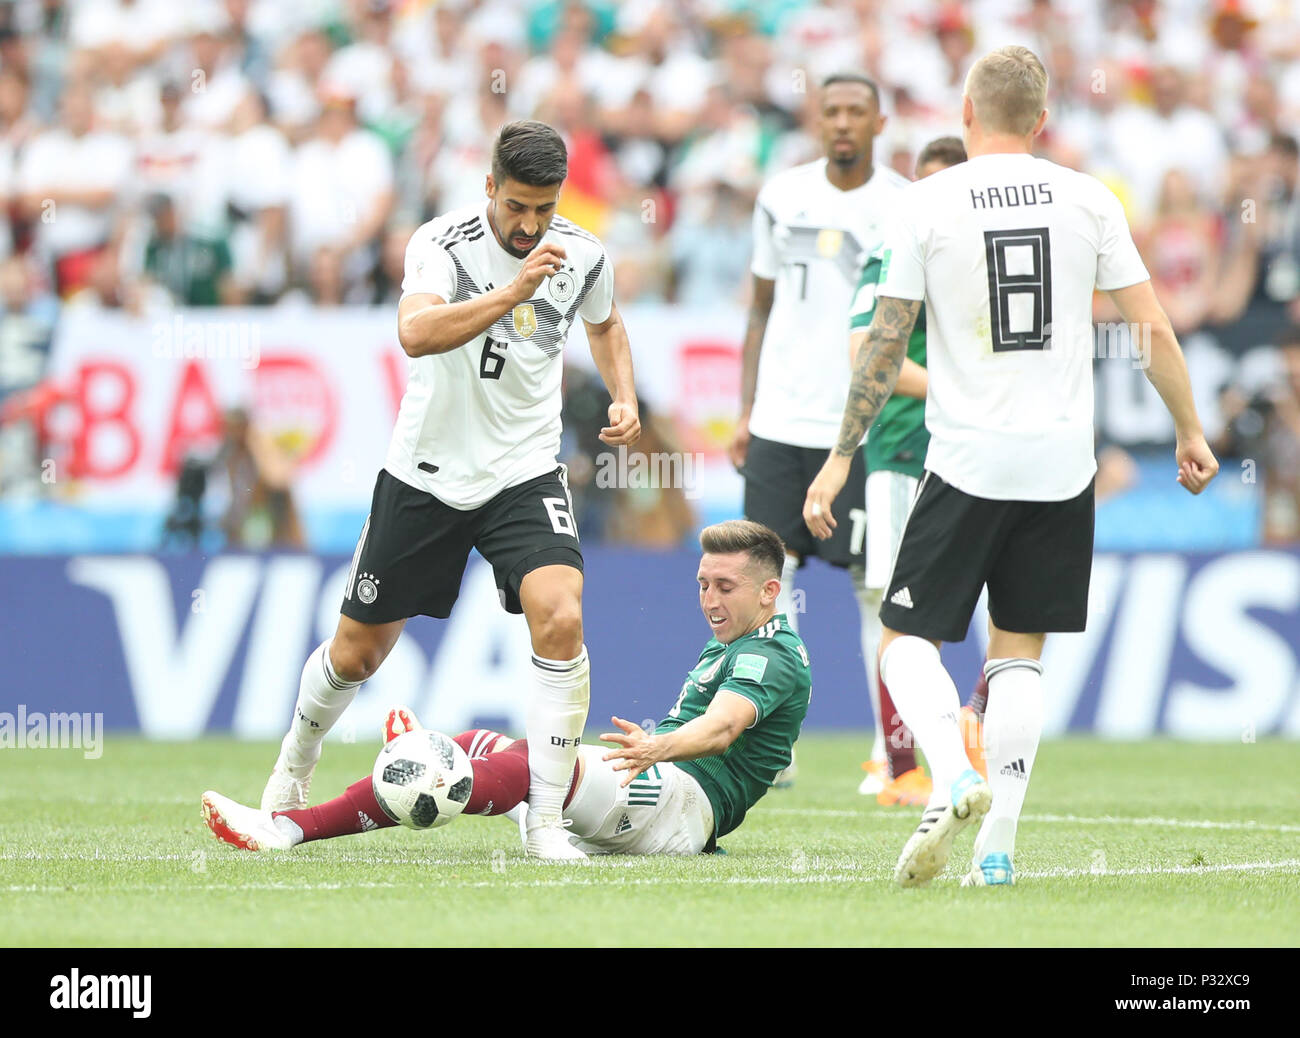 Moscow, Russia. 17th June, 2018. Sami Khedira (1st L) of Germany vies with Hector Herrera (bottom) of Mexico during a group F match between Germany and Mexico at the 2018 FIFA World Cup in Moscow, Russia, June 17, 2018. Credit: Xu Zijian/Xinhua/Alamy Live News Stock Photo